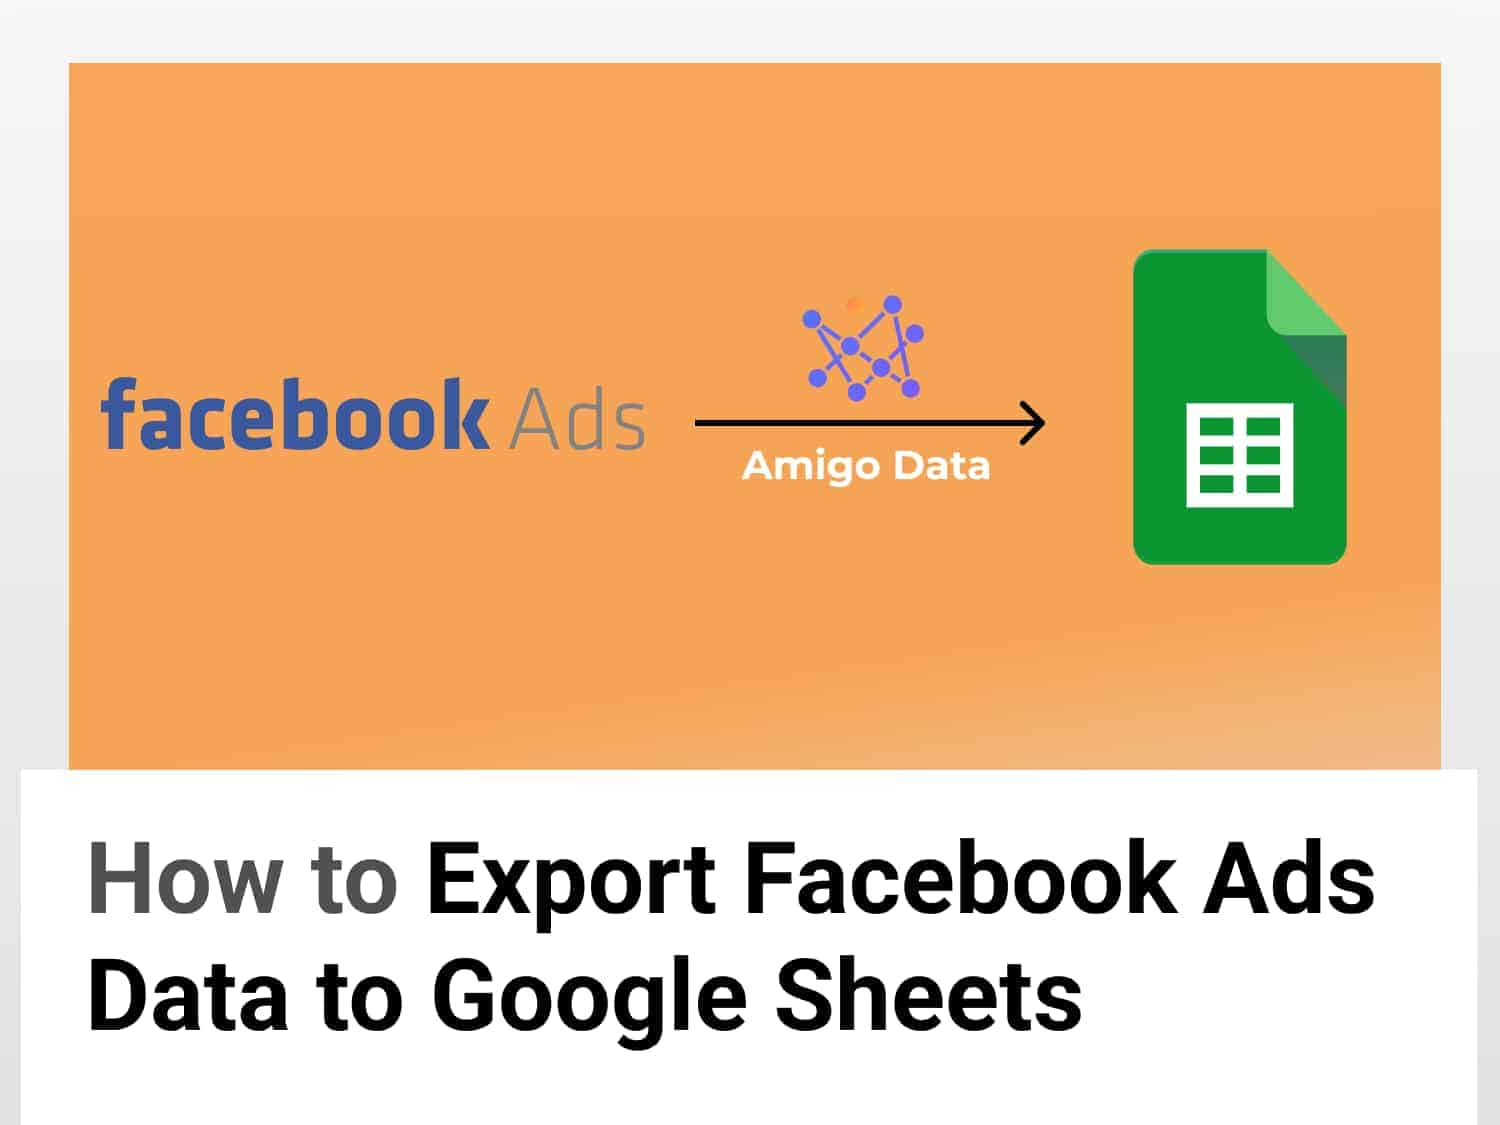 Export Facebook Ads data to Google Sheets